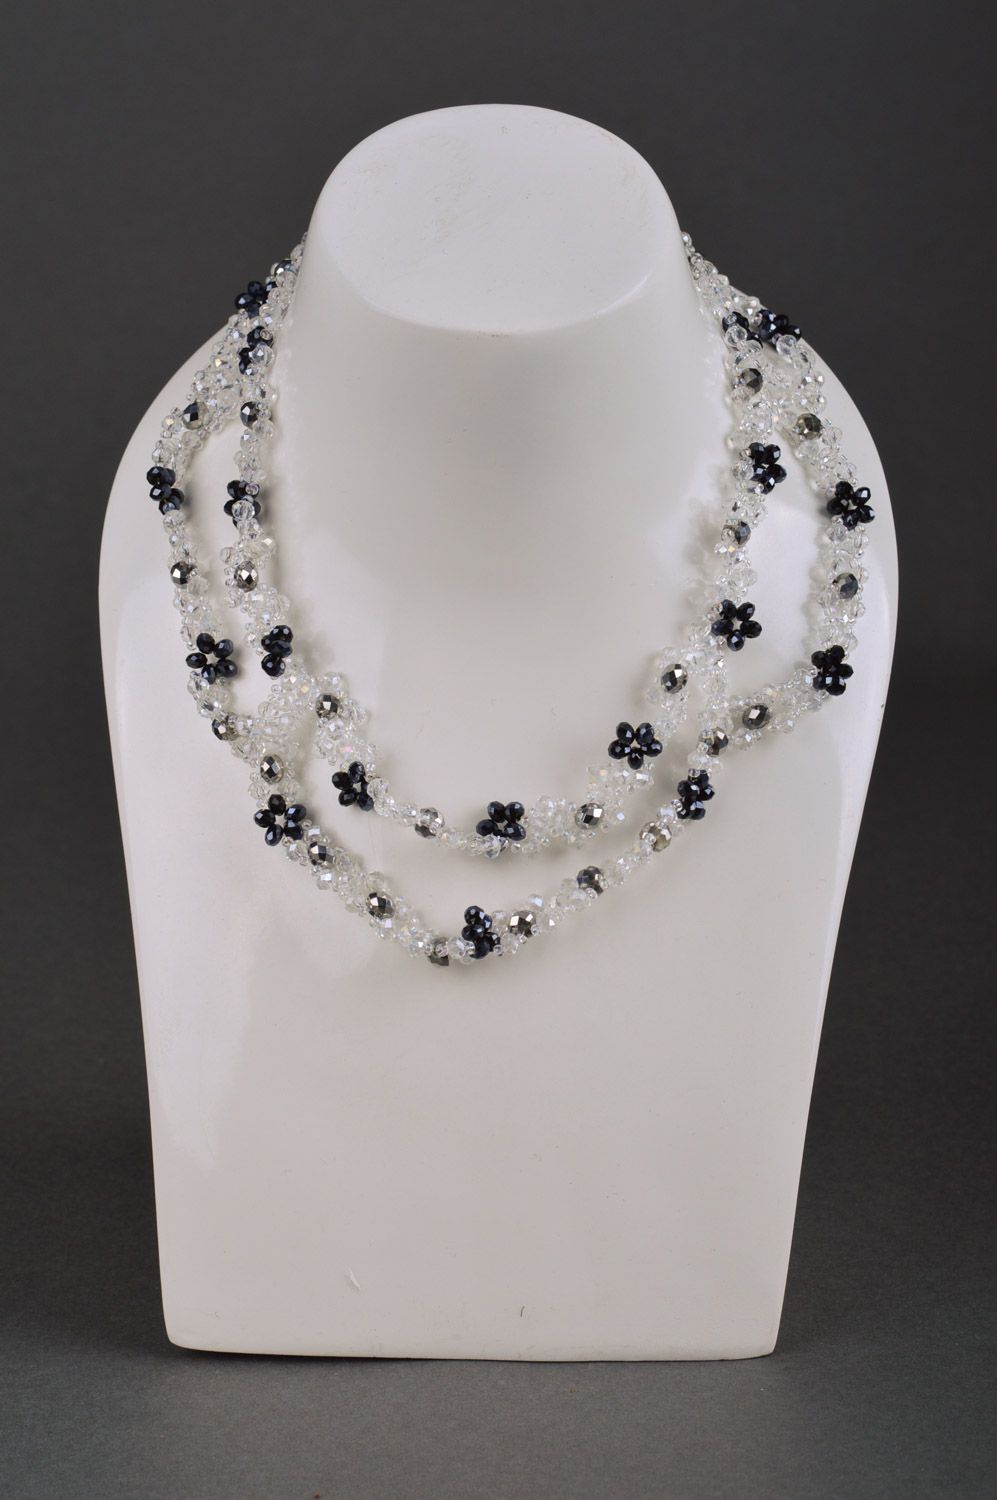 Handmade elegant mountain crystal bead necklace with black inserts Spark photo 1